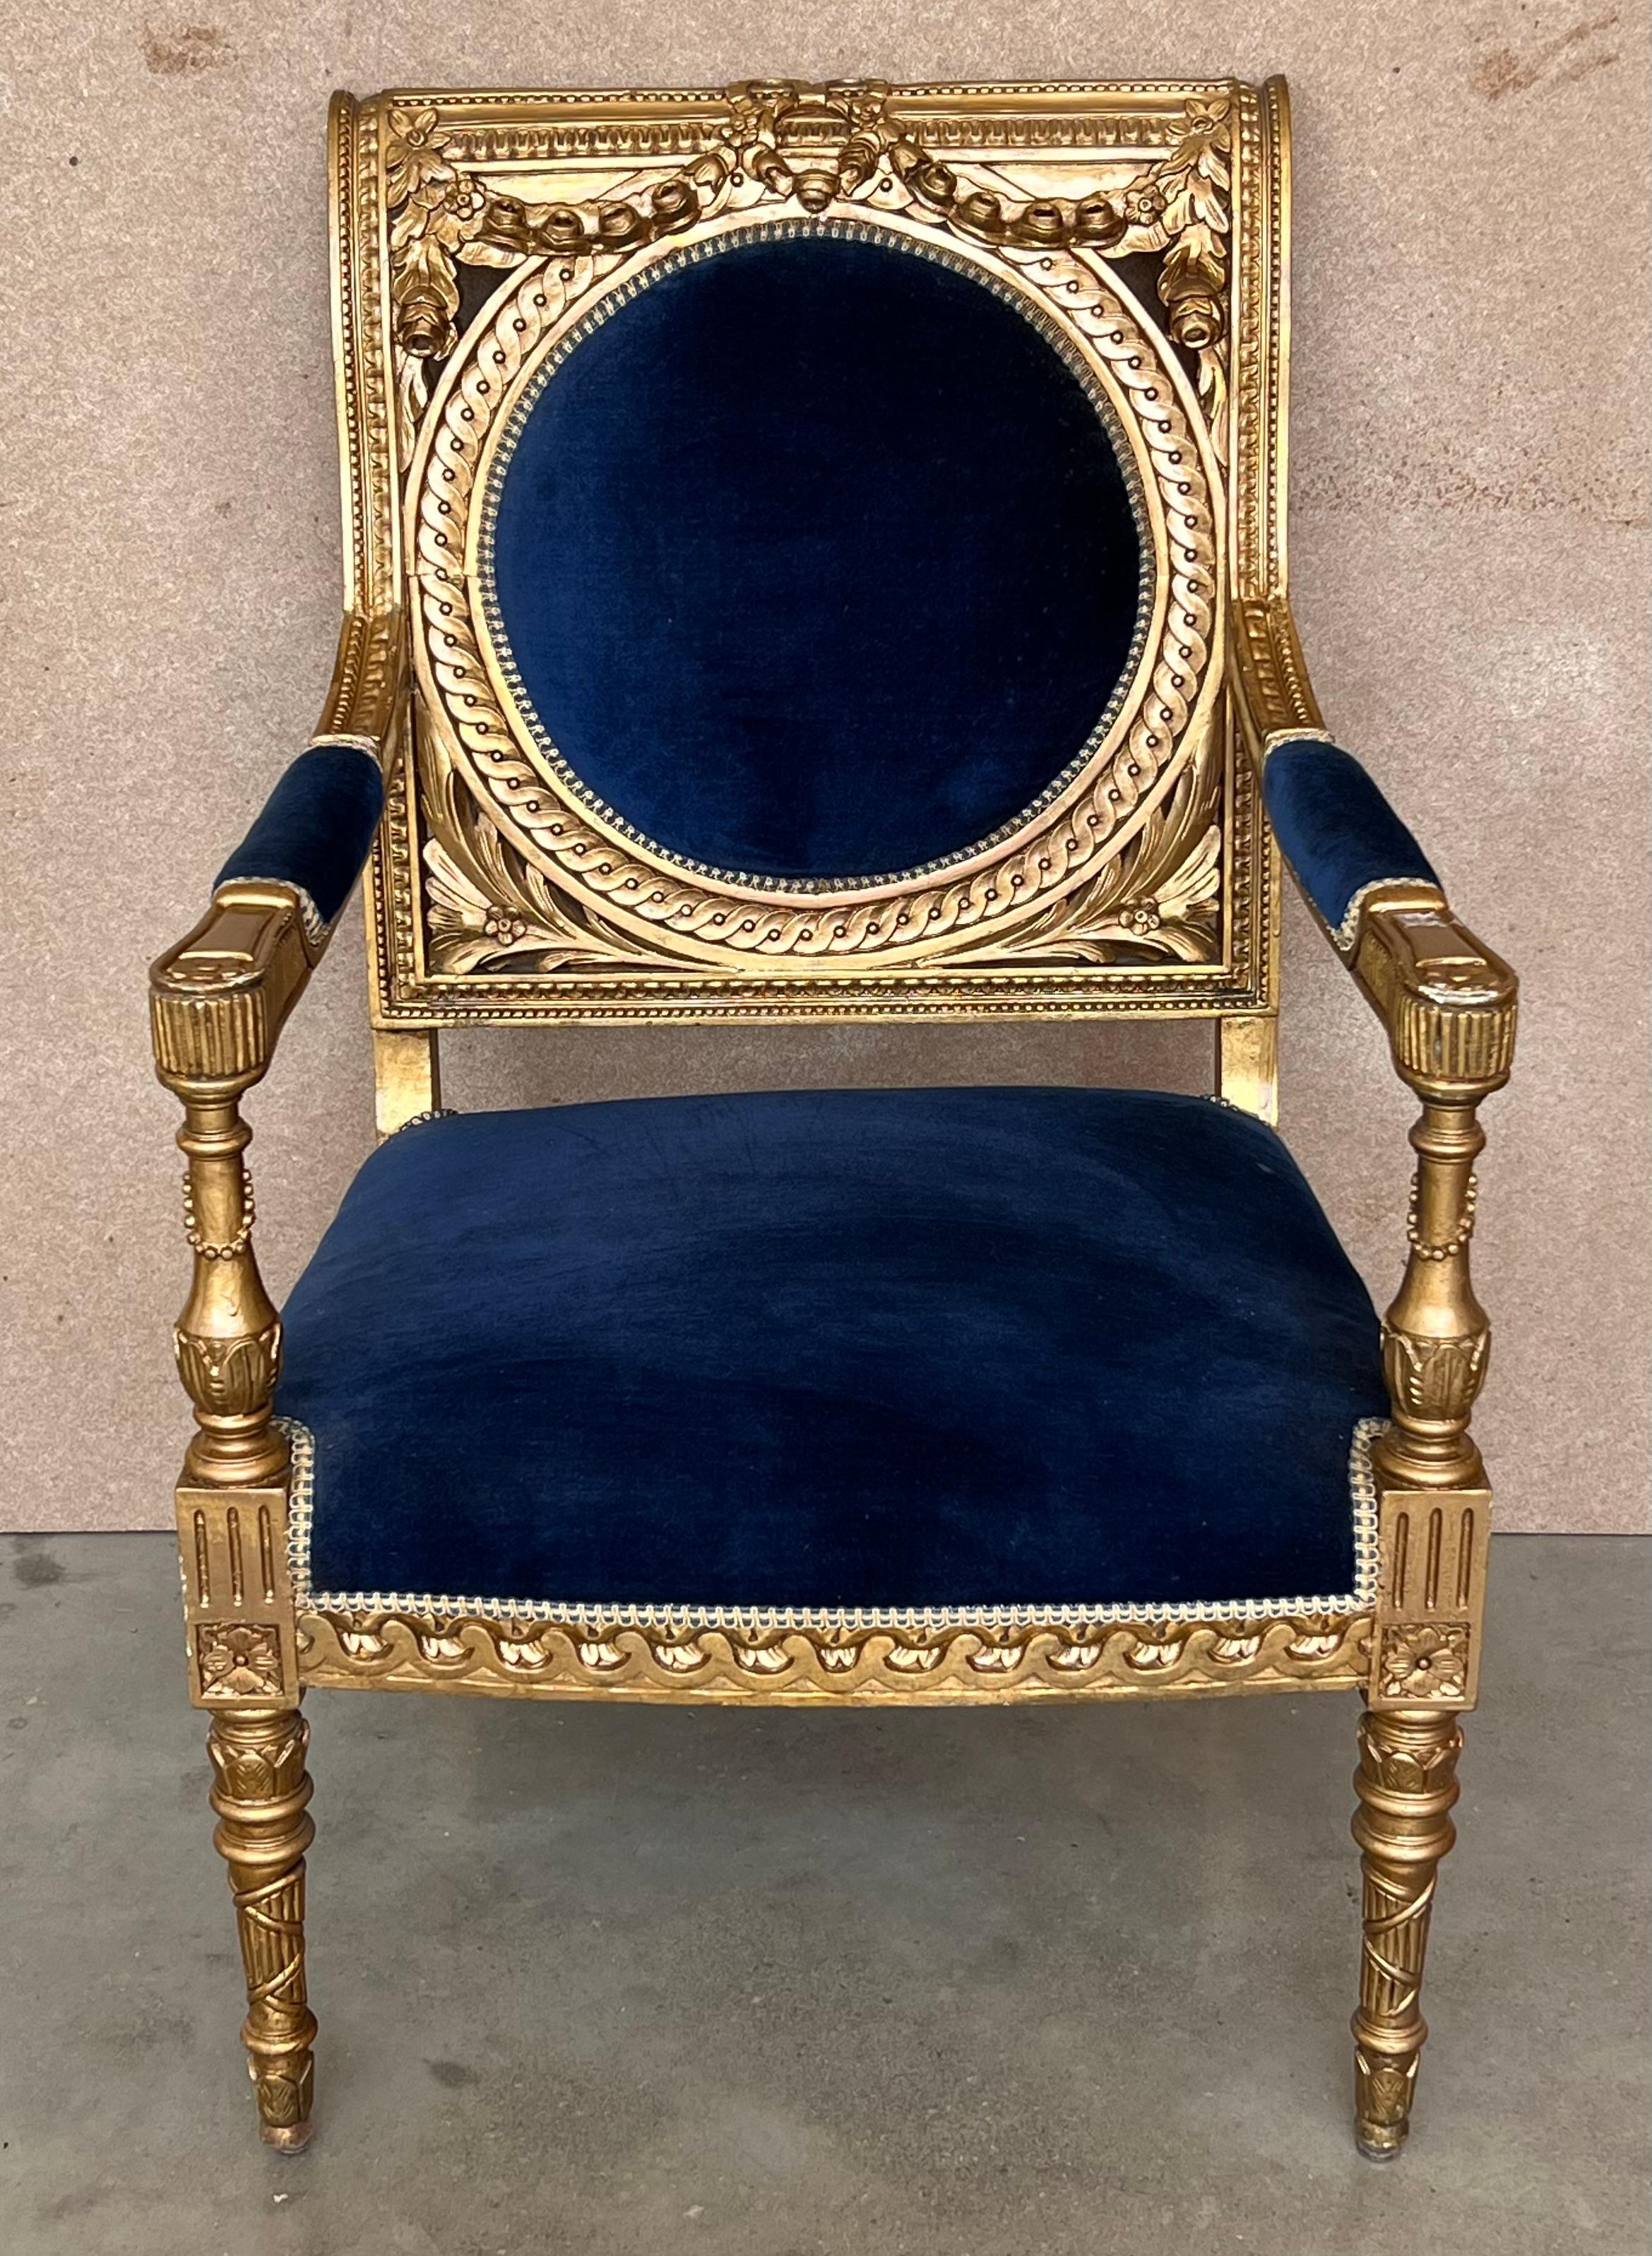 Louis XVI style armchair with medallion backrest.
 Elegantly carved and hand finished in a two tone patina, gilded or ecru, slightly aged. Made using traditional methods and materials. Upholstered in blue velvet.